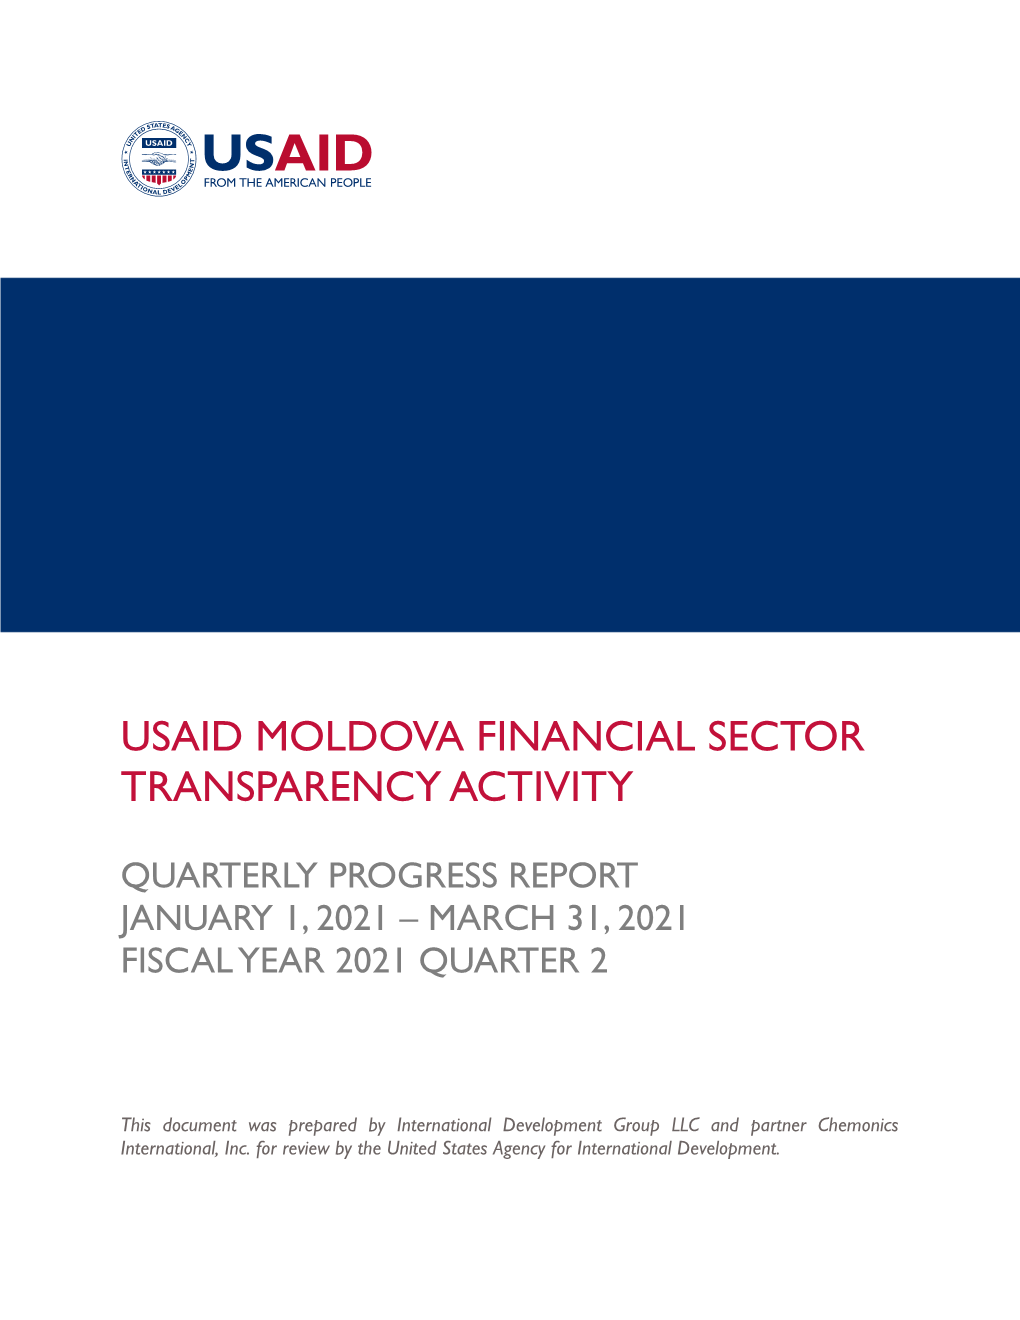 Usaid Moldova Financial Sector Transparency Activity